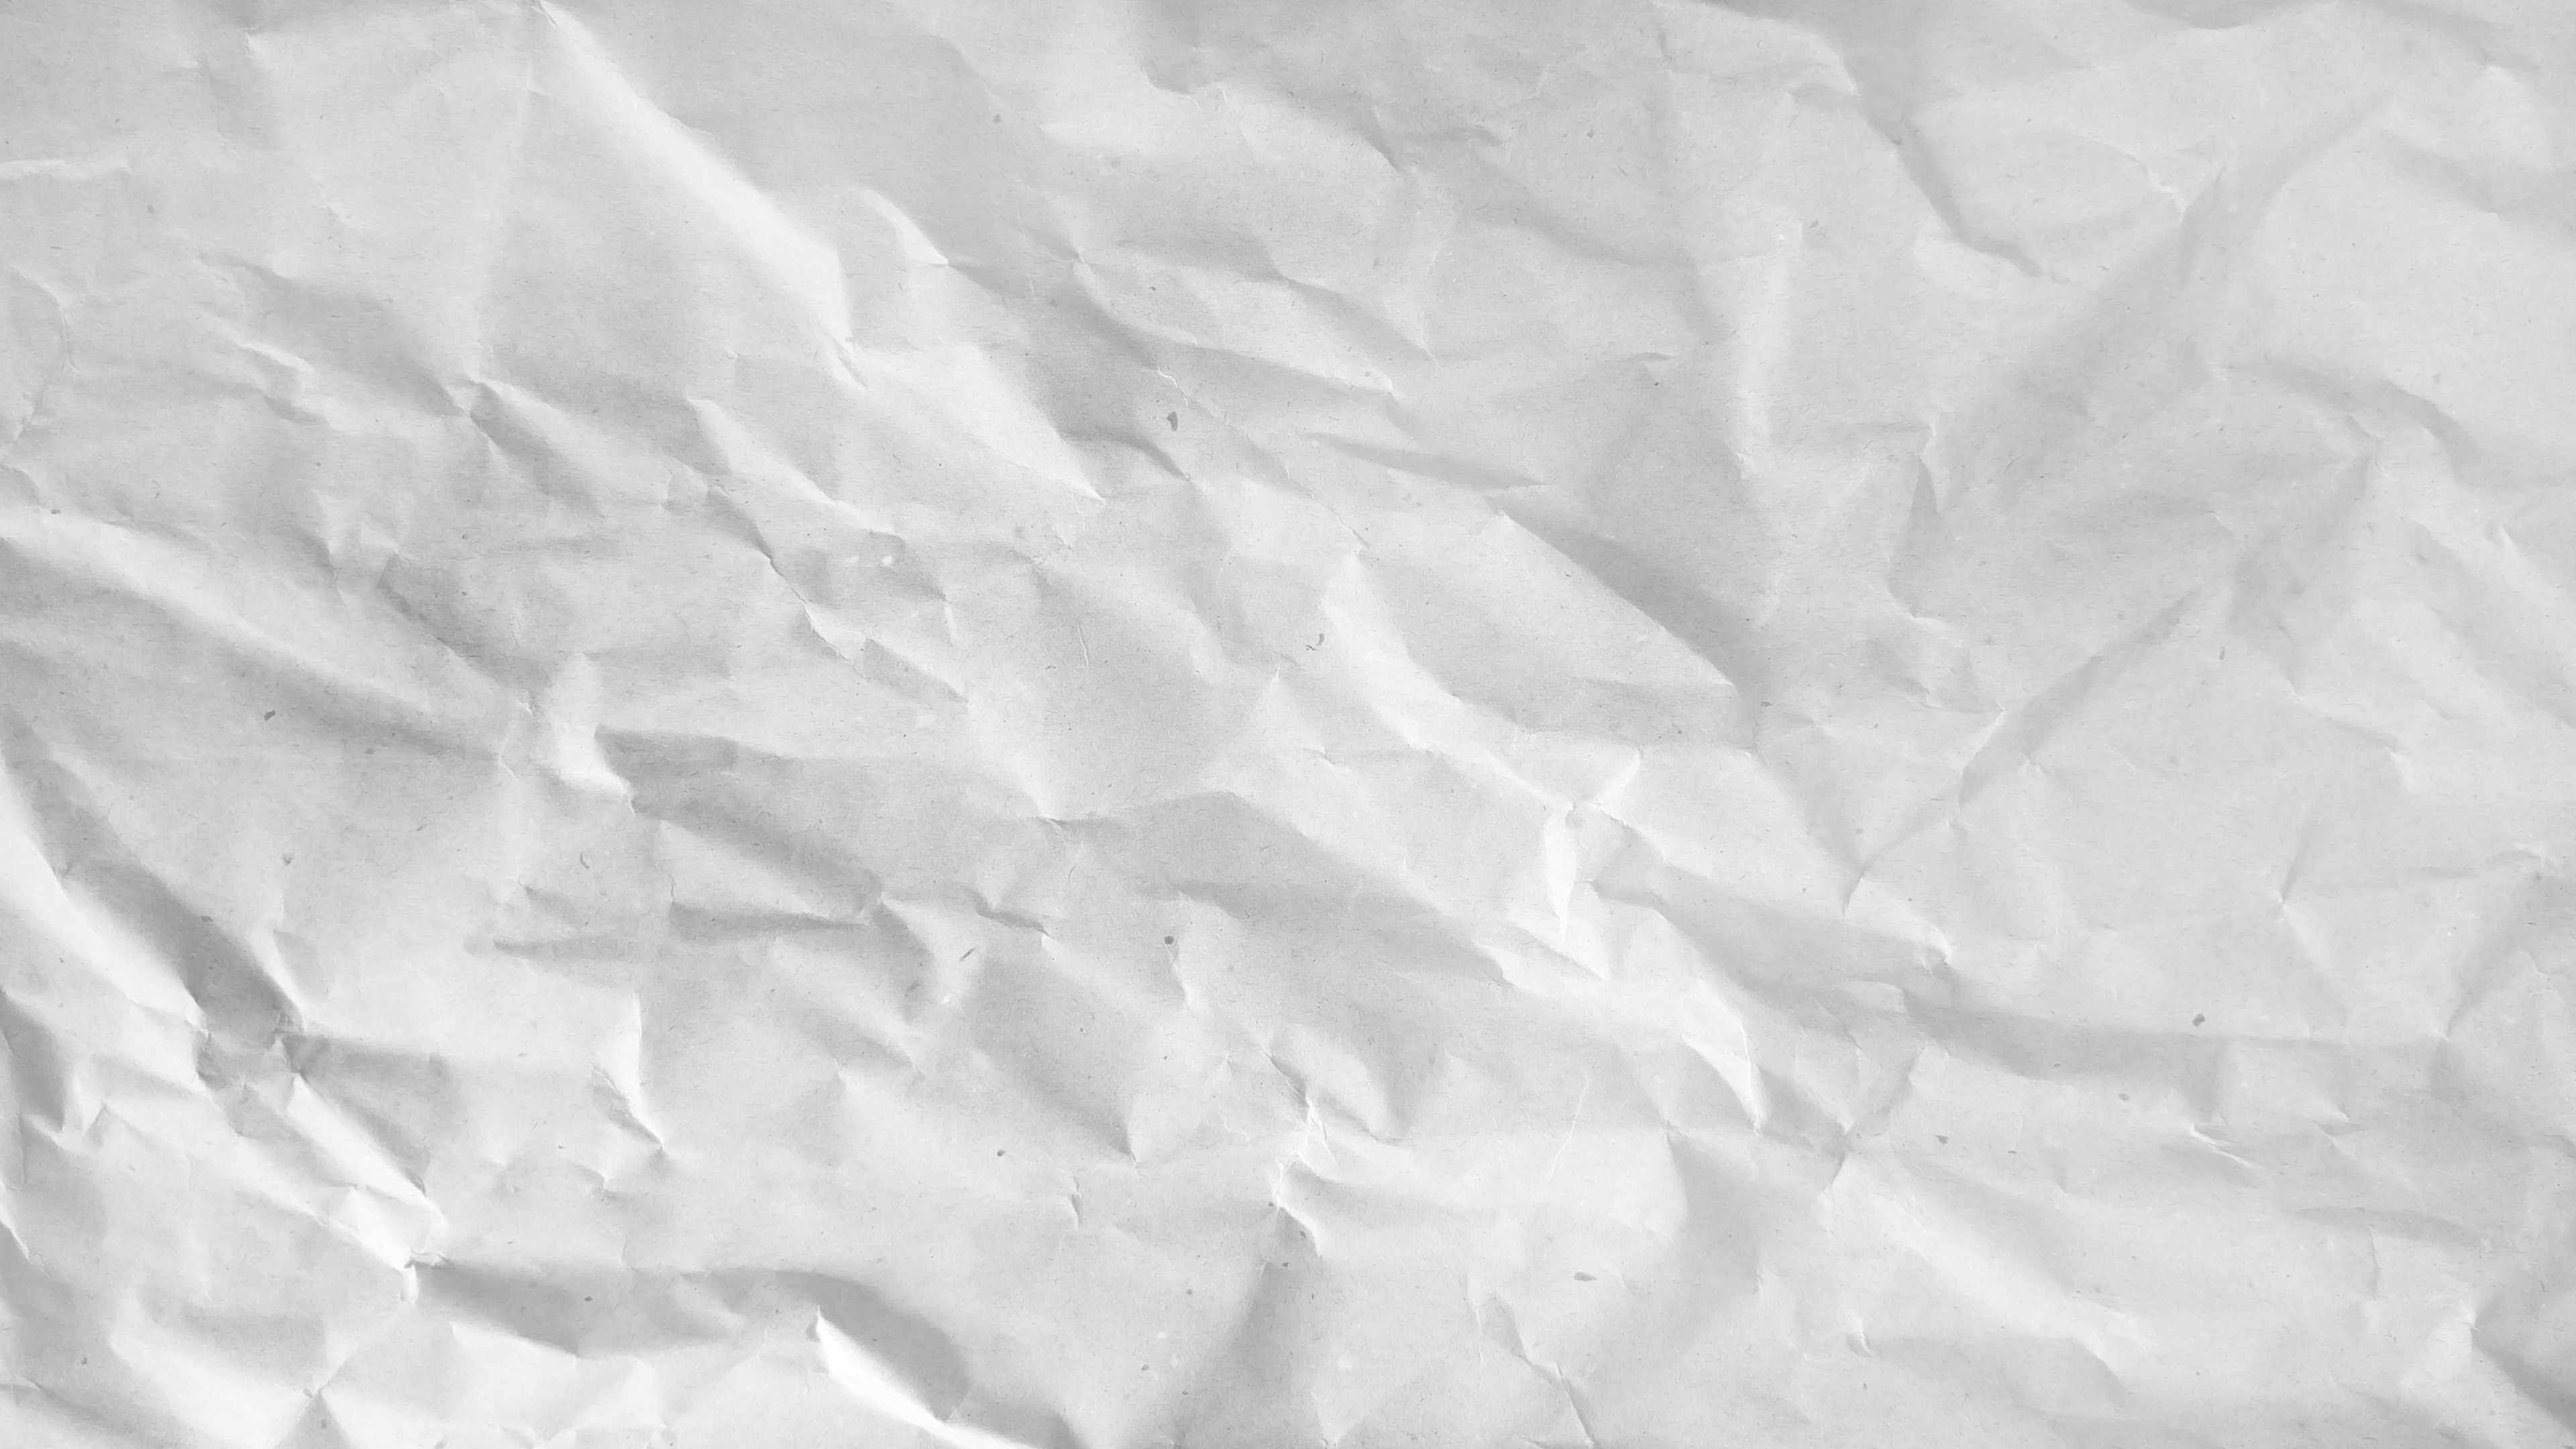 Free Photo No. 2 - Crumpled Paper Texture - Insight Droid